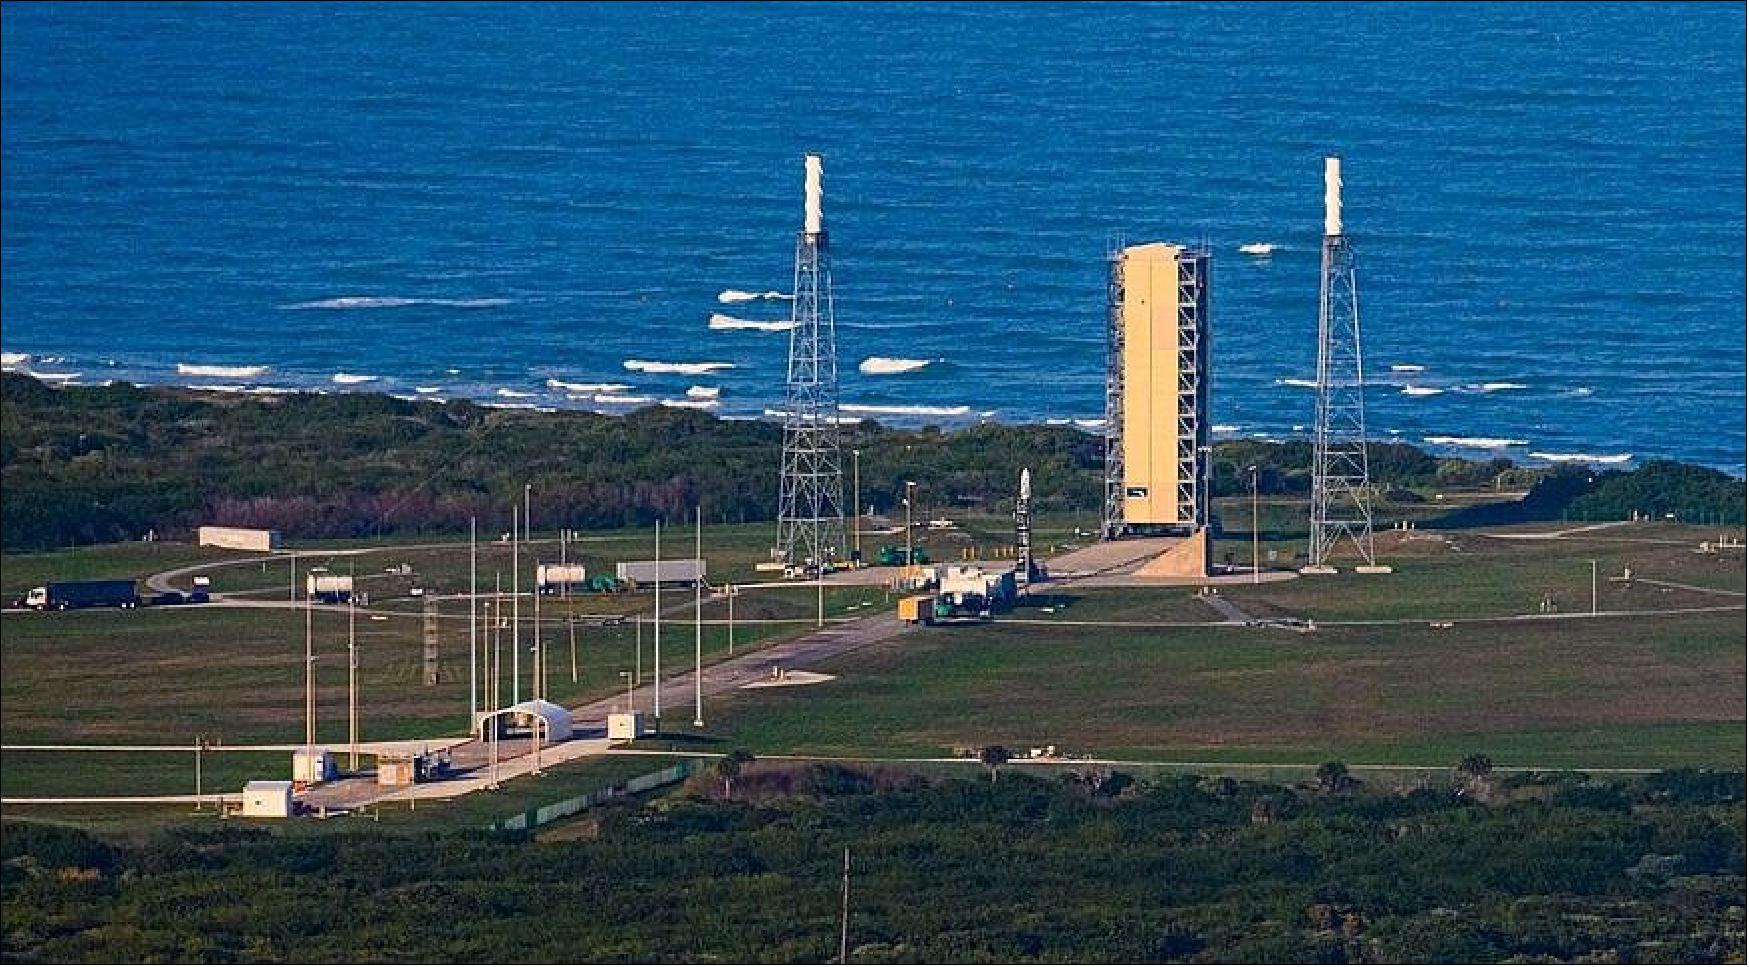 Figure 2: Astra, which conducted a launch of its Rocket 3.3 vehicle from Cape Canaveral in February, will return for three launches of NASA’s TROPICS satellites later this quarter (image credit: Astra/John Kraus)